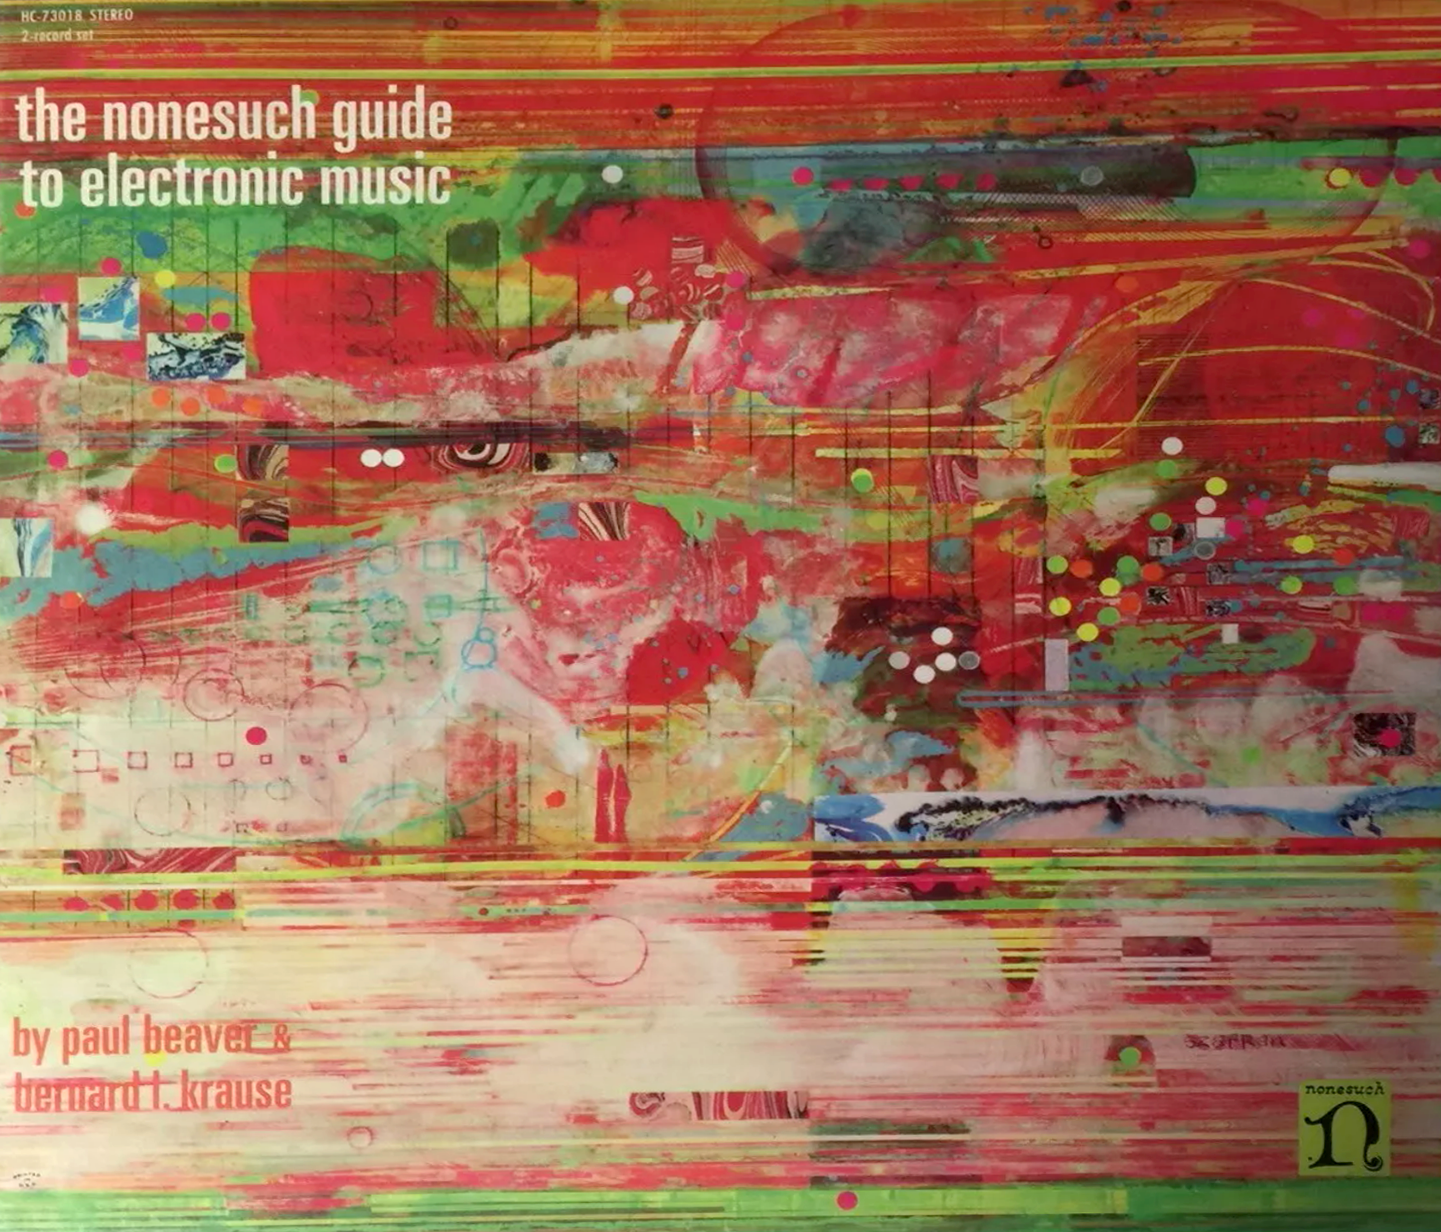 Nonesuch Records: The Nonesuch Guide to Electronic Music